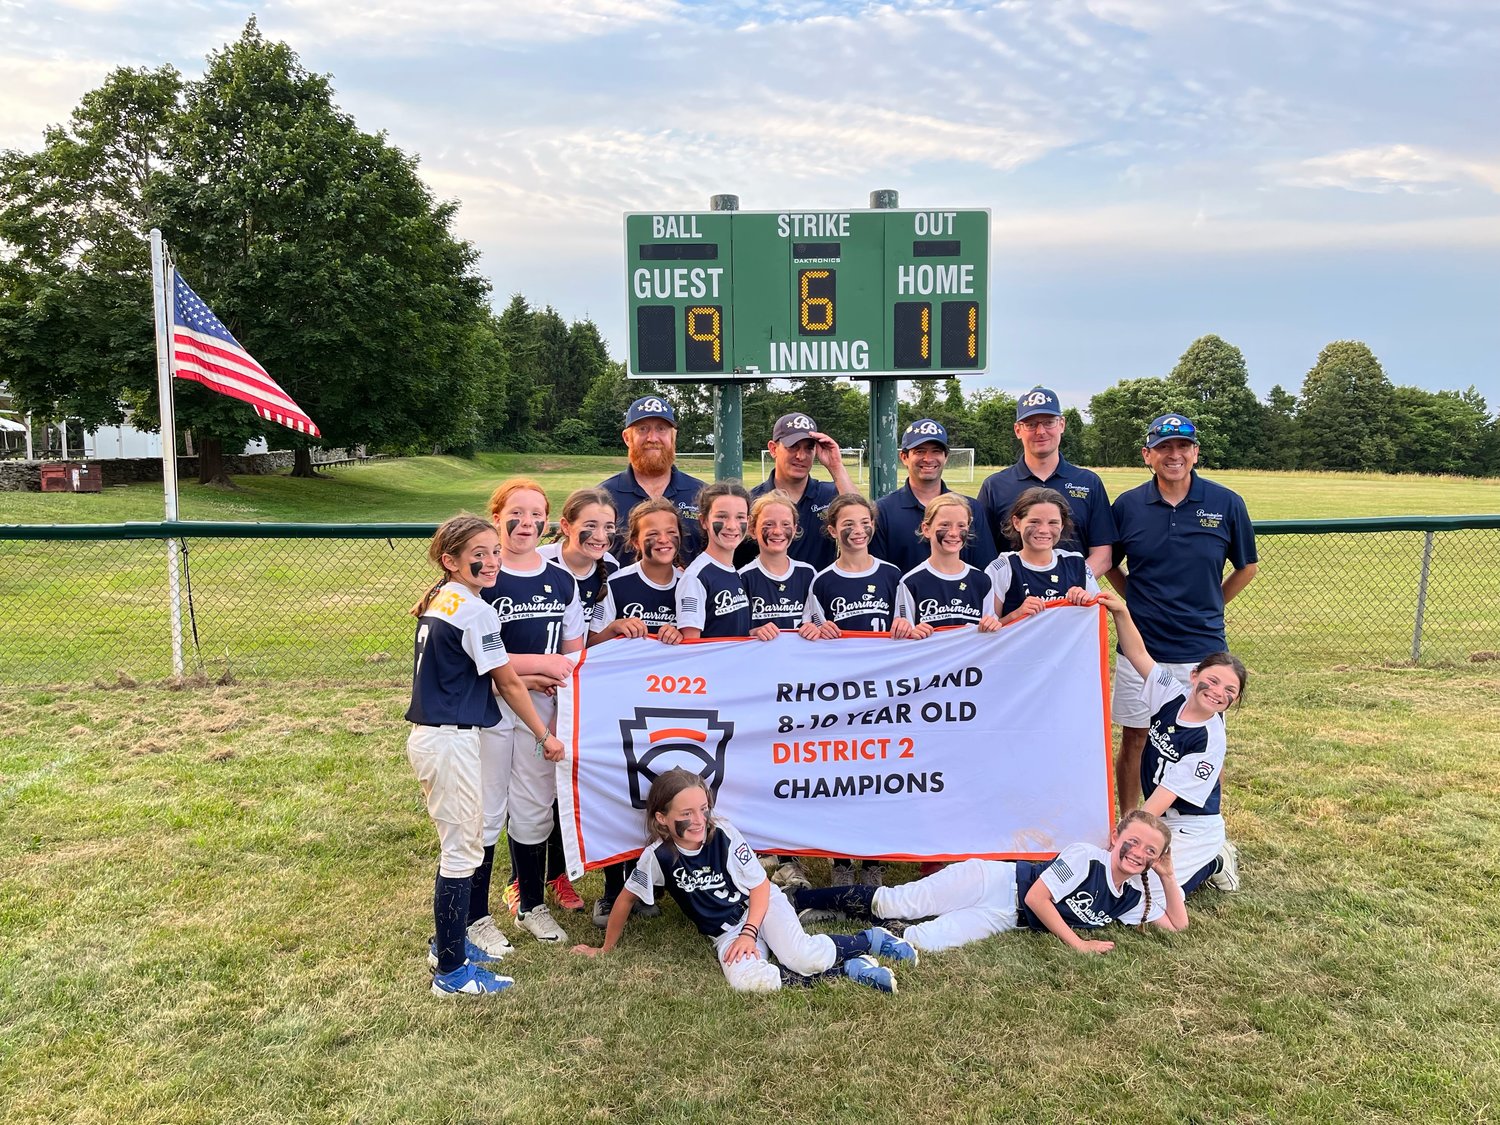 Members of the Barrington Minors Division All-Star softball team hold up the District 2 Champions banner following their win over Portsmouth on Friday night.